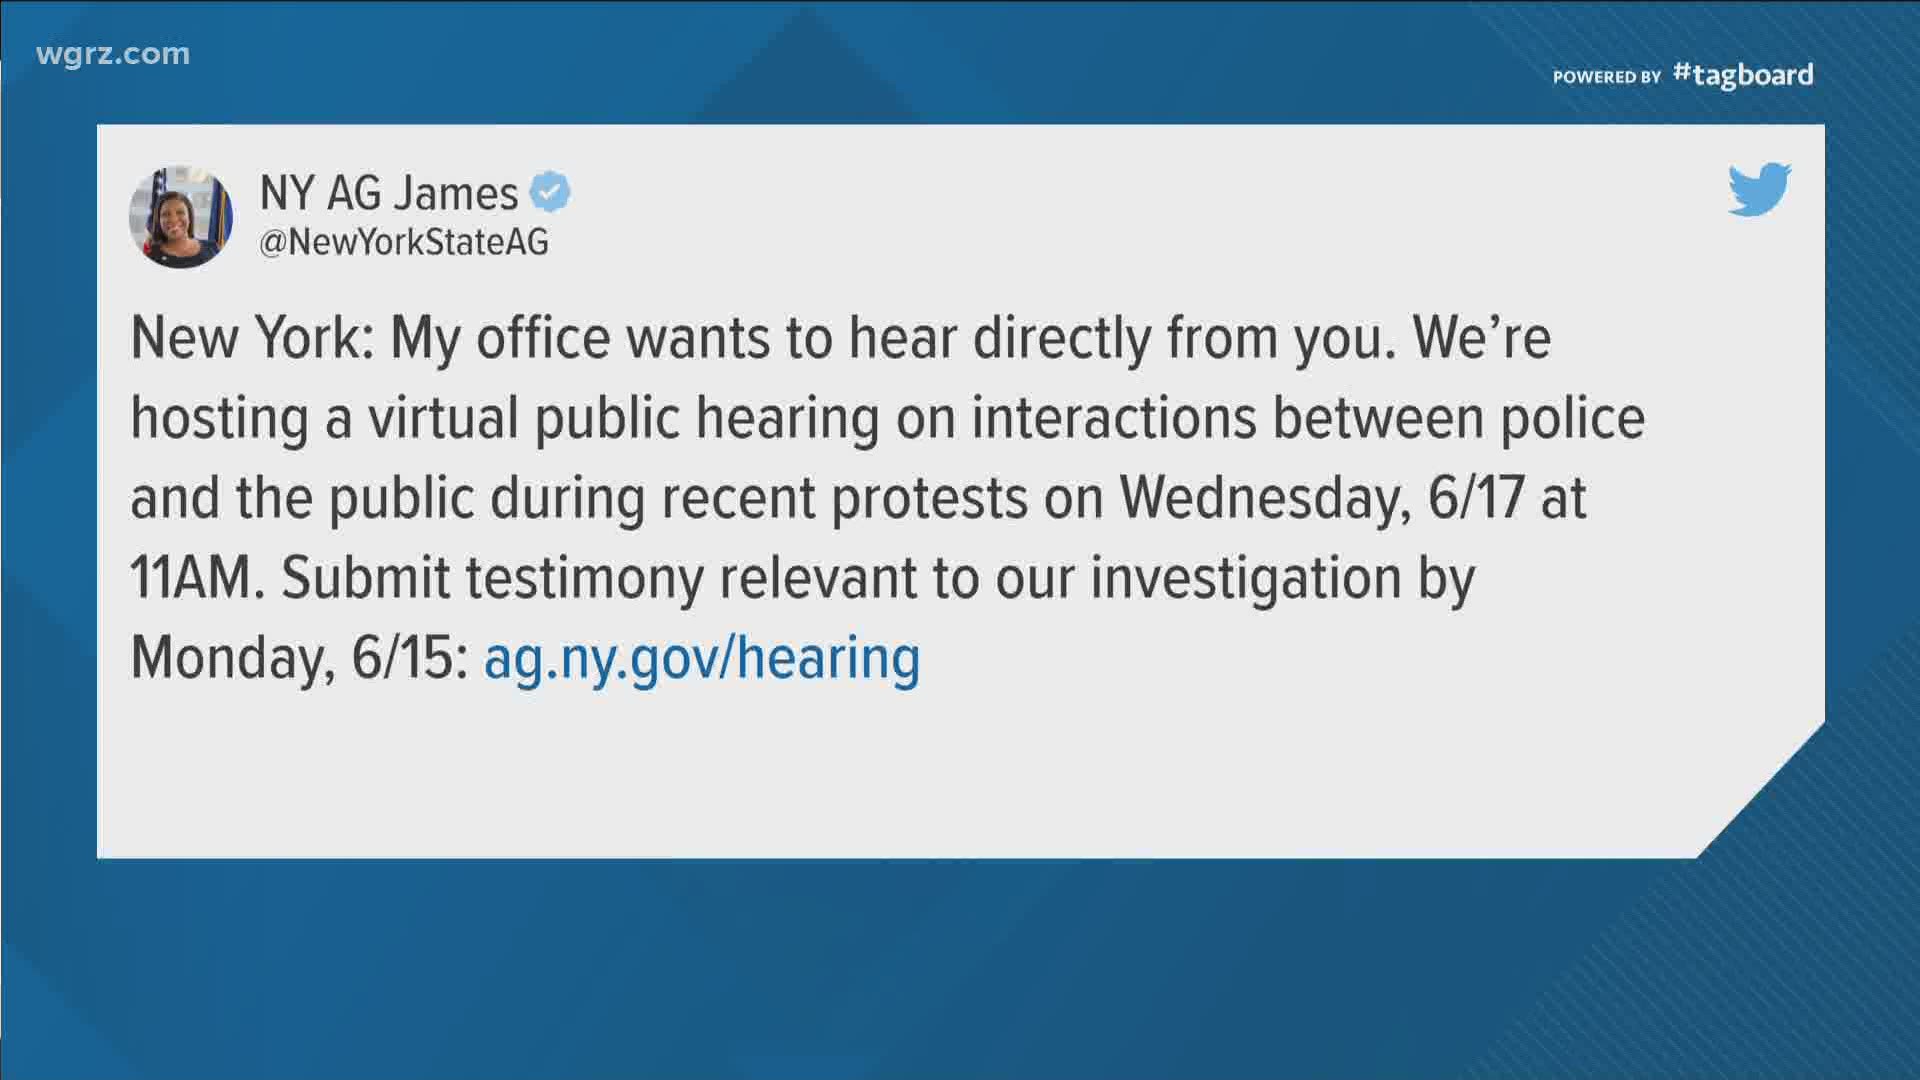 New York's Attorney General Letitia James is seeking testimony of interactions between police and the public during recent protests for a public hearing.